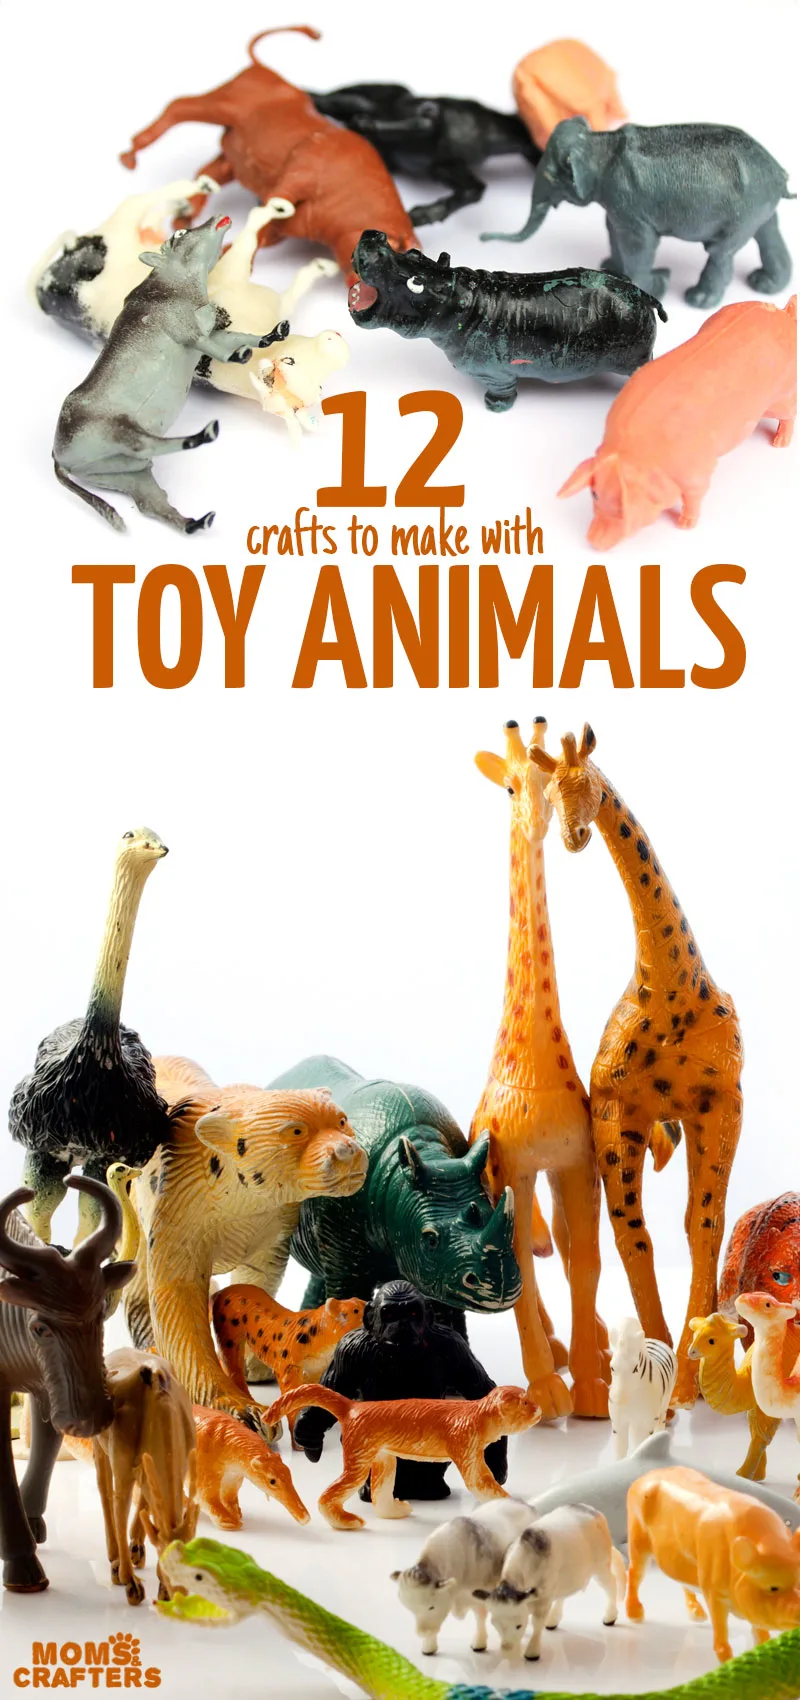 Things to make with Toy Animals that don't look cheap at all!